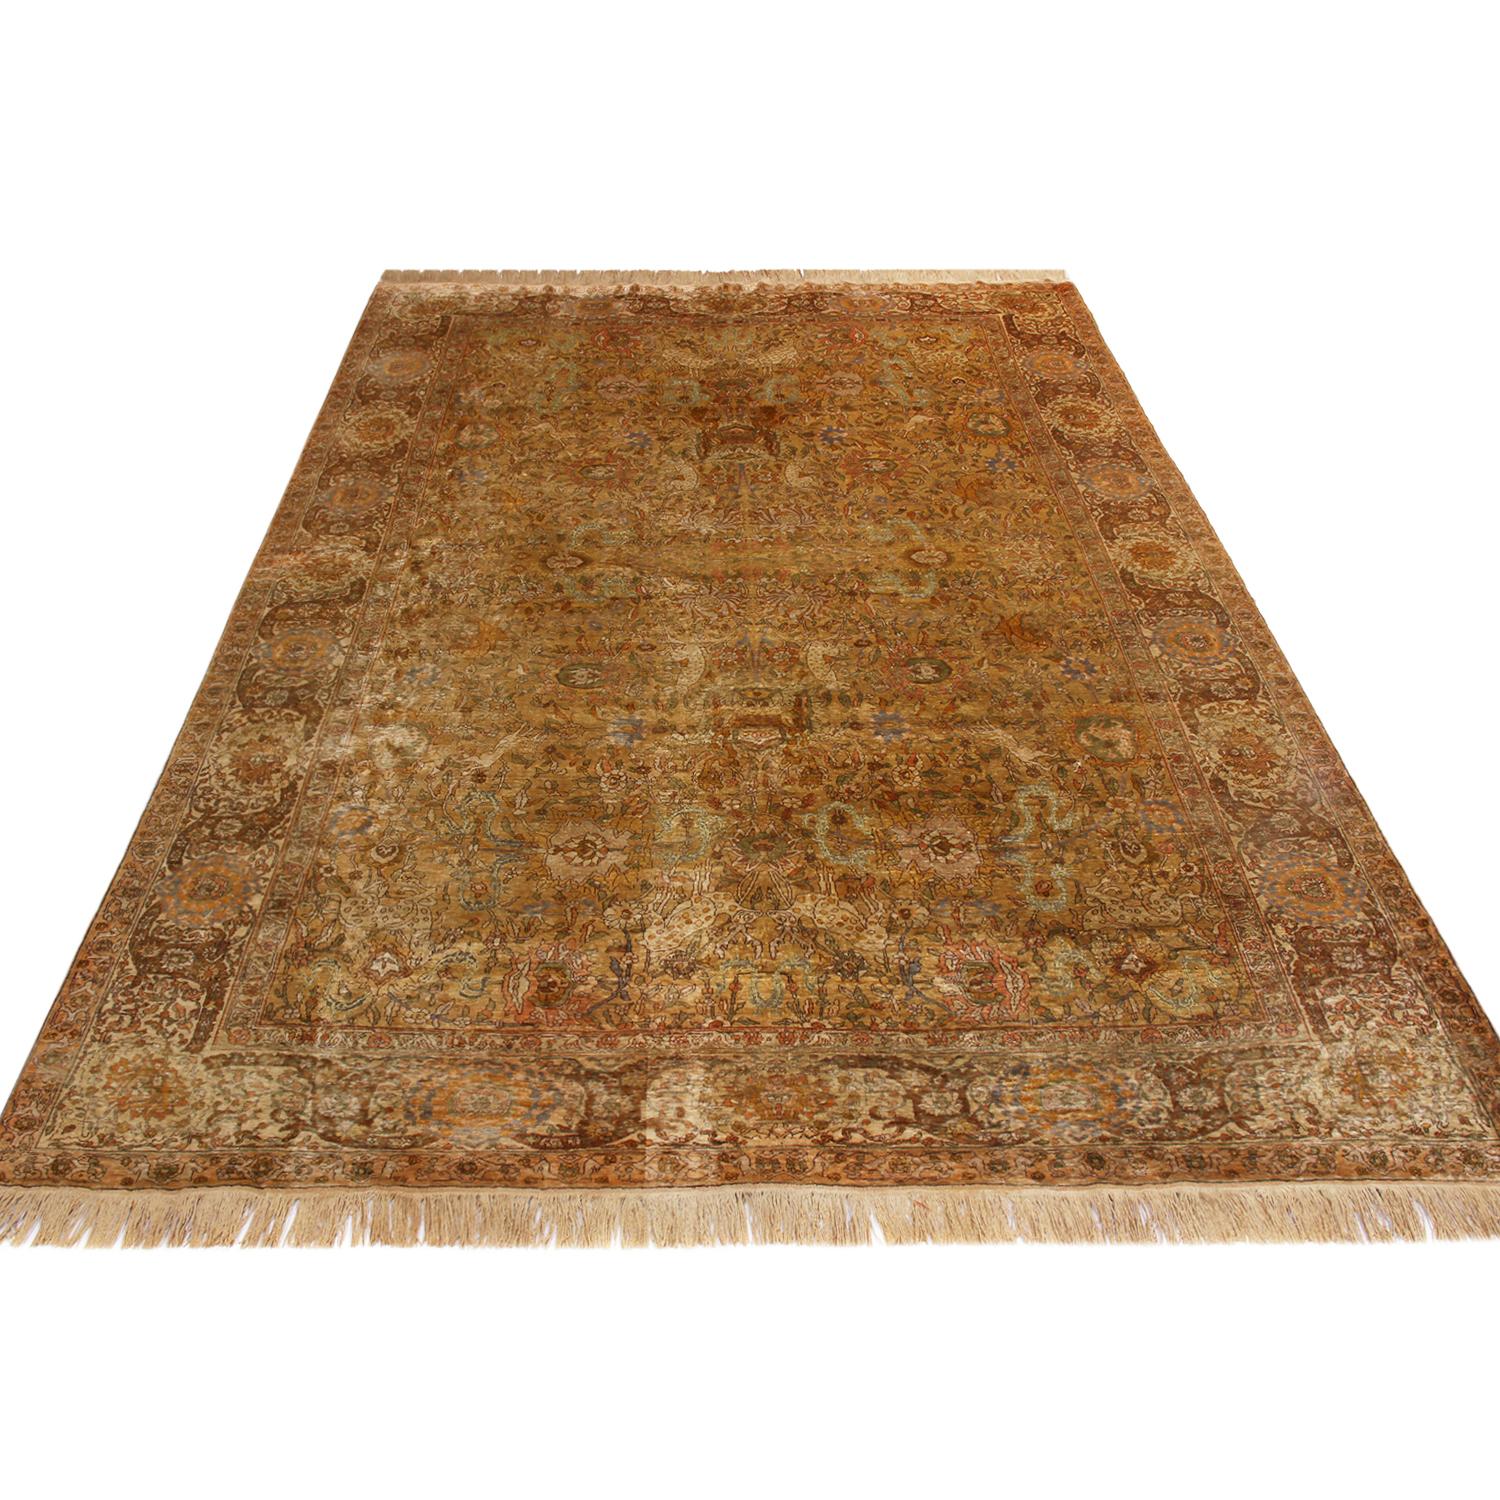 Originating from Turkey between 1890-1900, this antique Sivas rug enjoys both hand knotted, naturally luminous silk and an uncommon variety of naturalist patterns, including especially rare deer and stag symbols widely believed to symbolize change